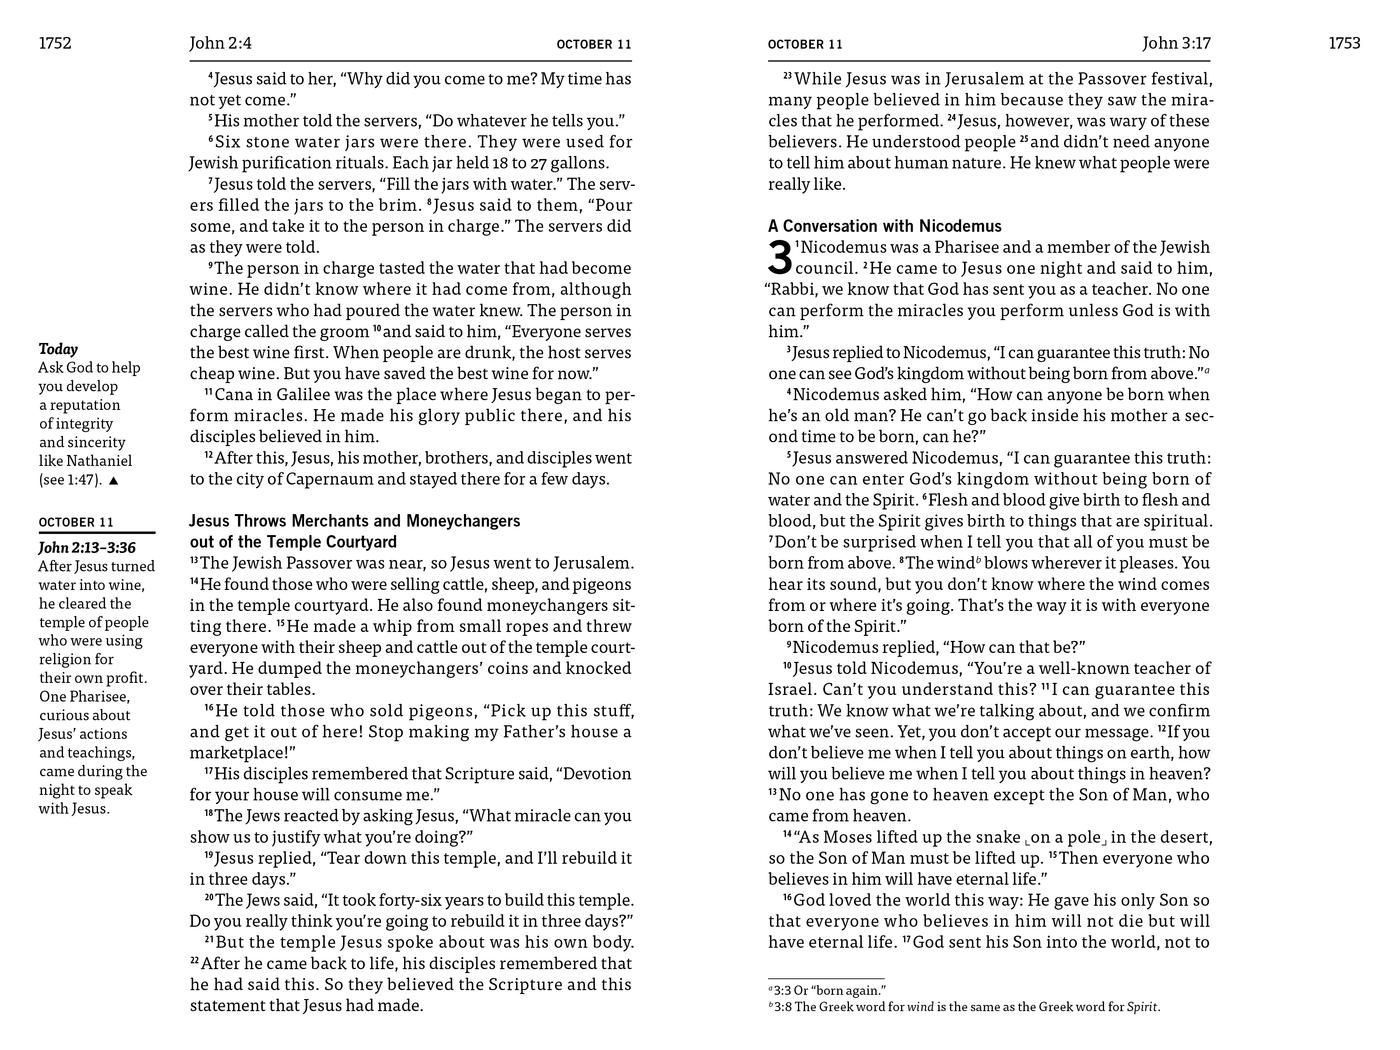 Deluxe GOD’S WORD for Each Day: Reading Plan Bible (Case of 12 Copies)